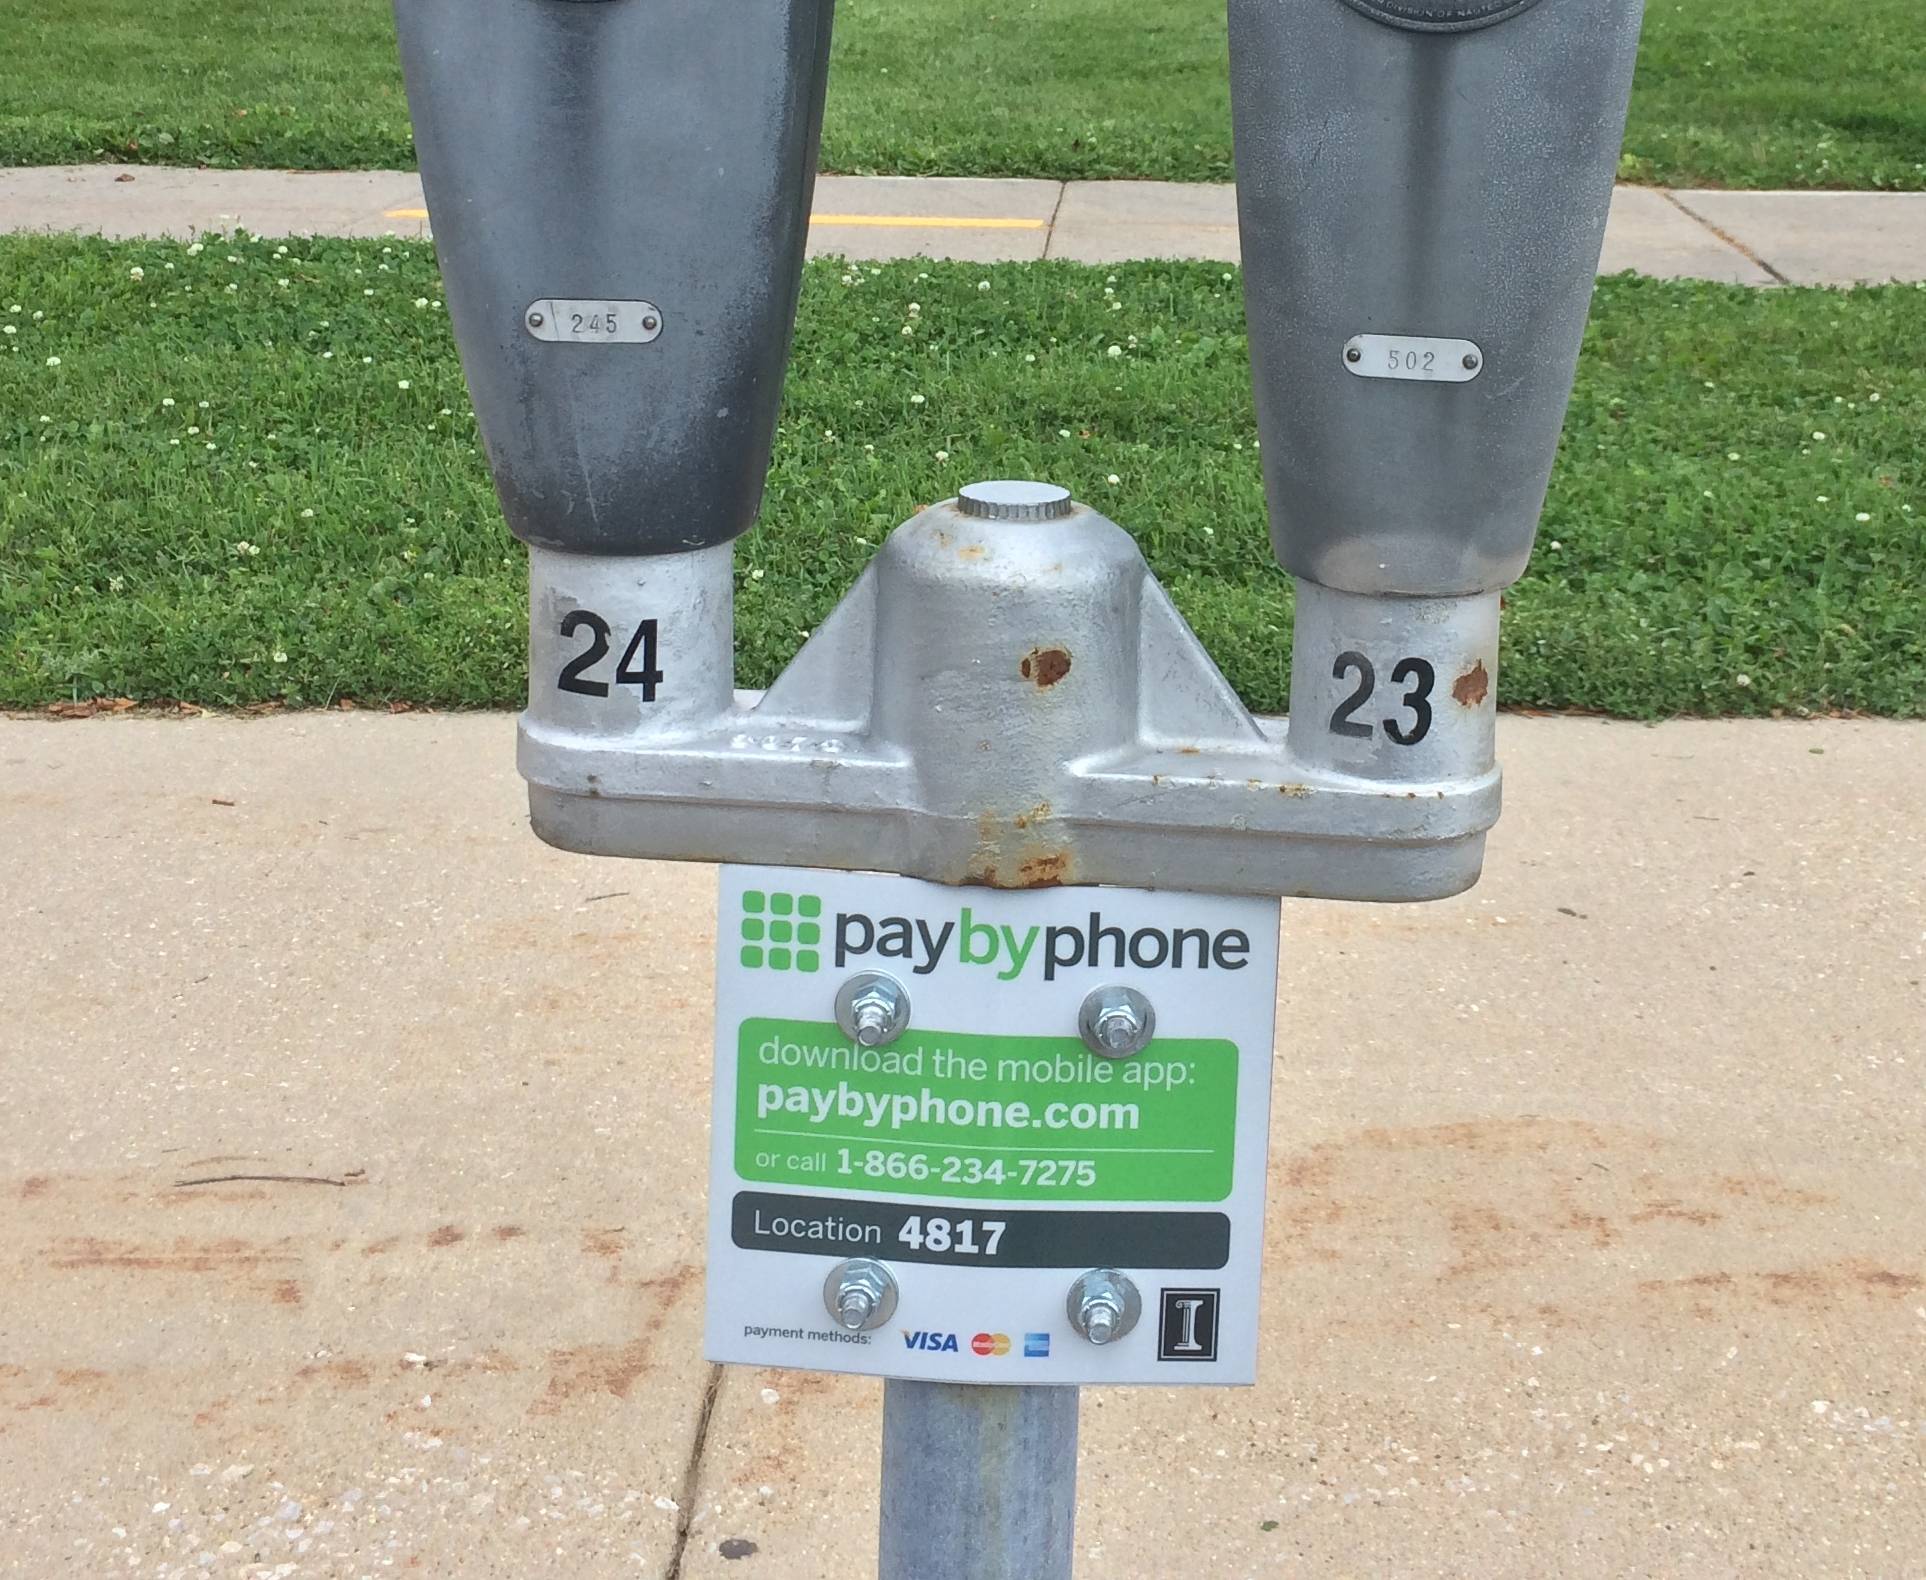 Pay by phone parking meter